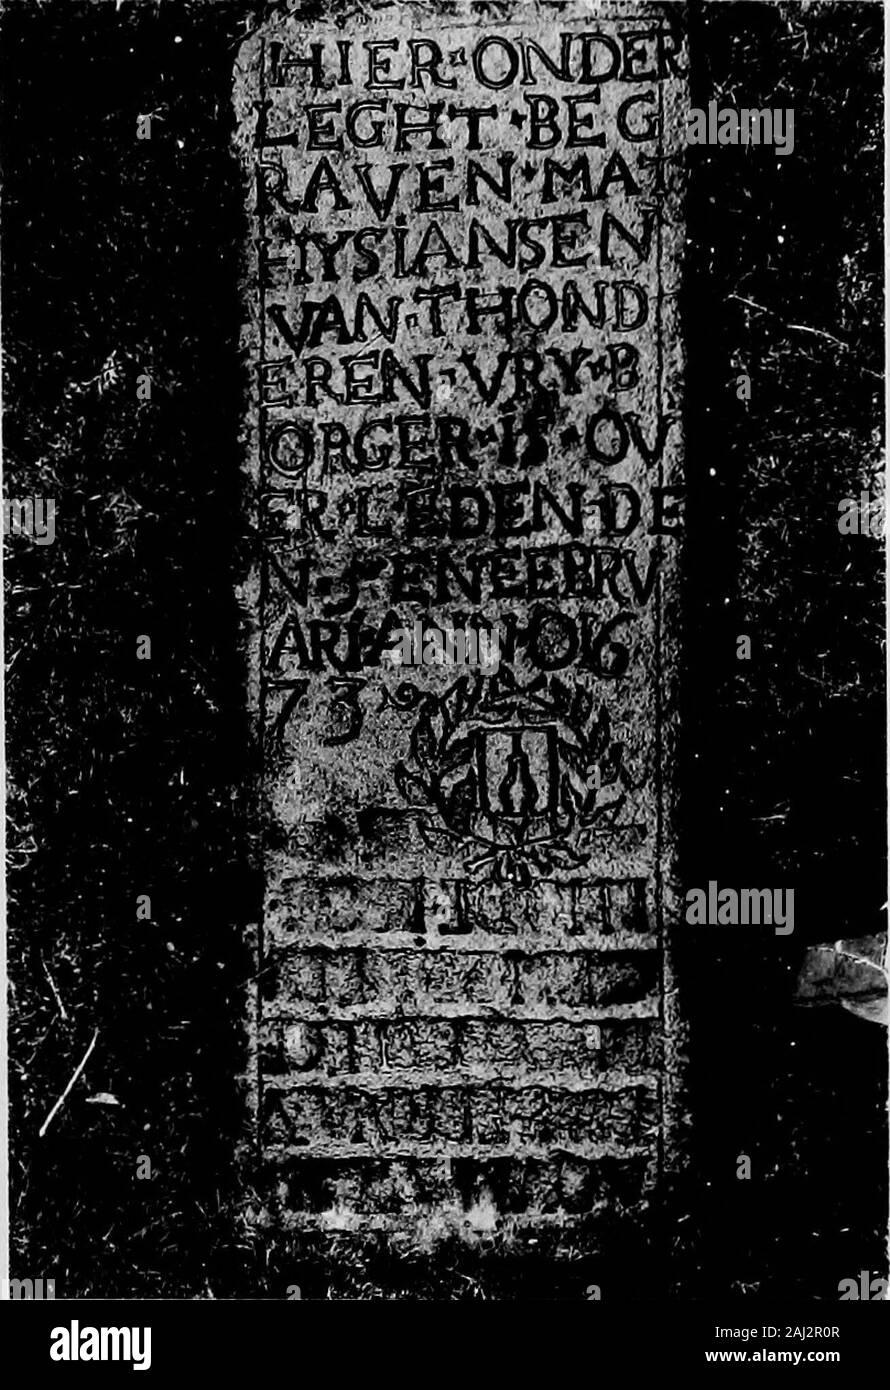 Historical tombstones of Malacca, mostly of Portuguese origin, with the inscriptions in detail and illustrated by numerous photographs . IN ST. PAULS CHURCH, MALACCA. ( 37 ) JouRNAr, S.B.R.A.S. No. 33. Page 14, No. 27. Hereunder lies buried MATTHIJS JANSEN, of Thonderen, Free Citizen.Died the 5th February, 1673. (The Portuguese inscription on the lower part of this stone has been obliterated.The device is apparently a bottle.; Page 15, No. 28 Thus far extends the Grave of Harbour Master PEDEL.(This looks as if Shabandar Pedel had trespassed on some one elses tombstone.) ( 38 ) ST. PAULS CHURCH Stock Photo